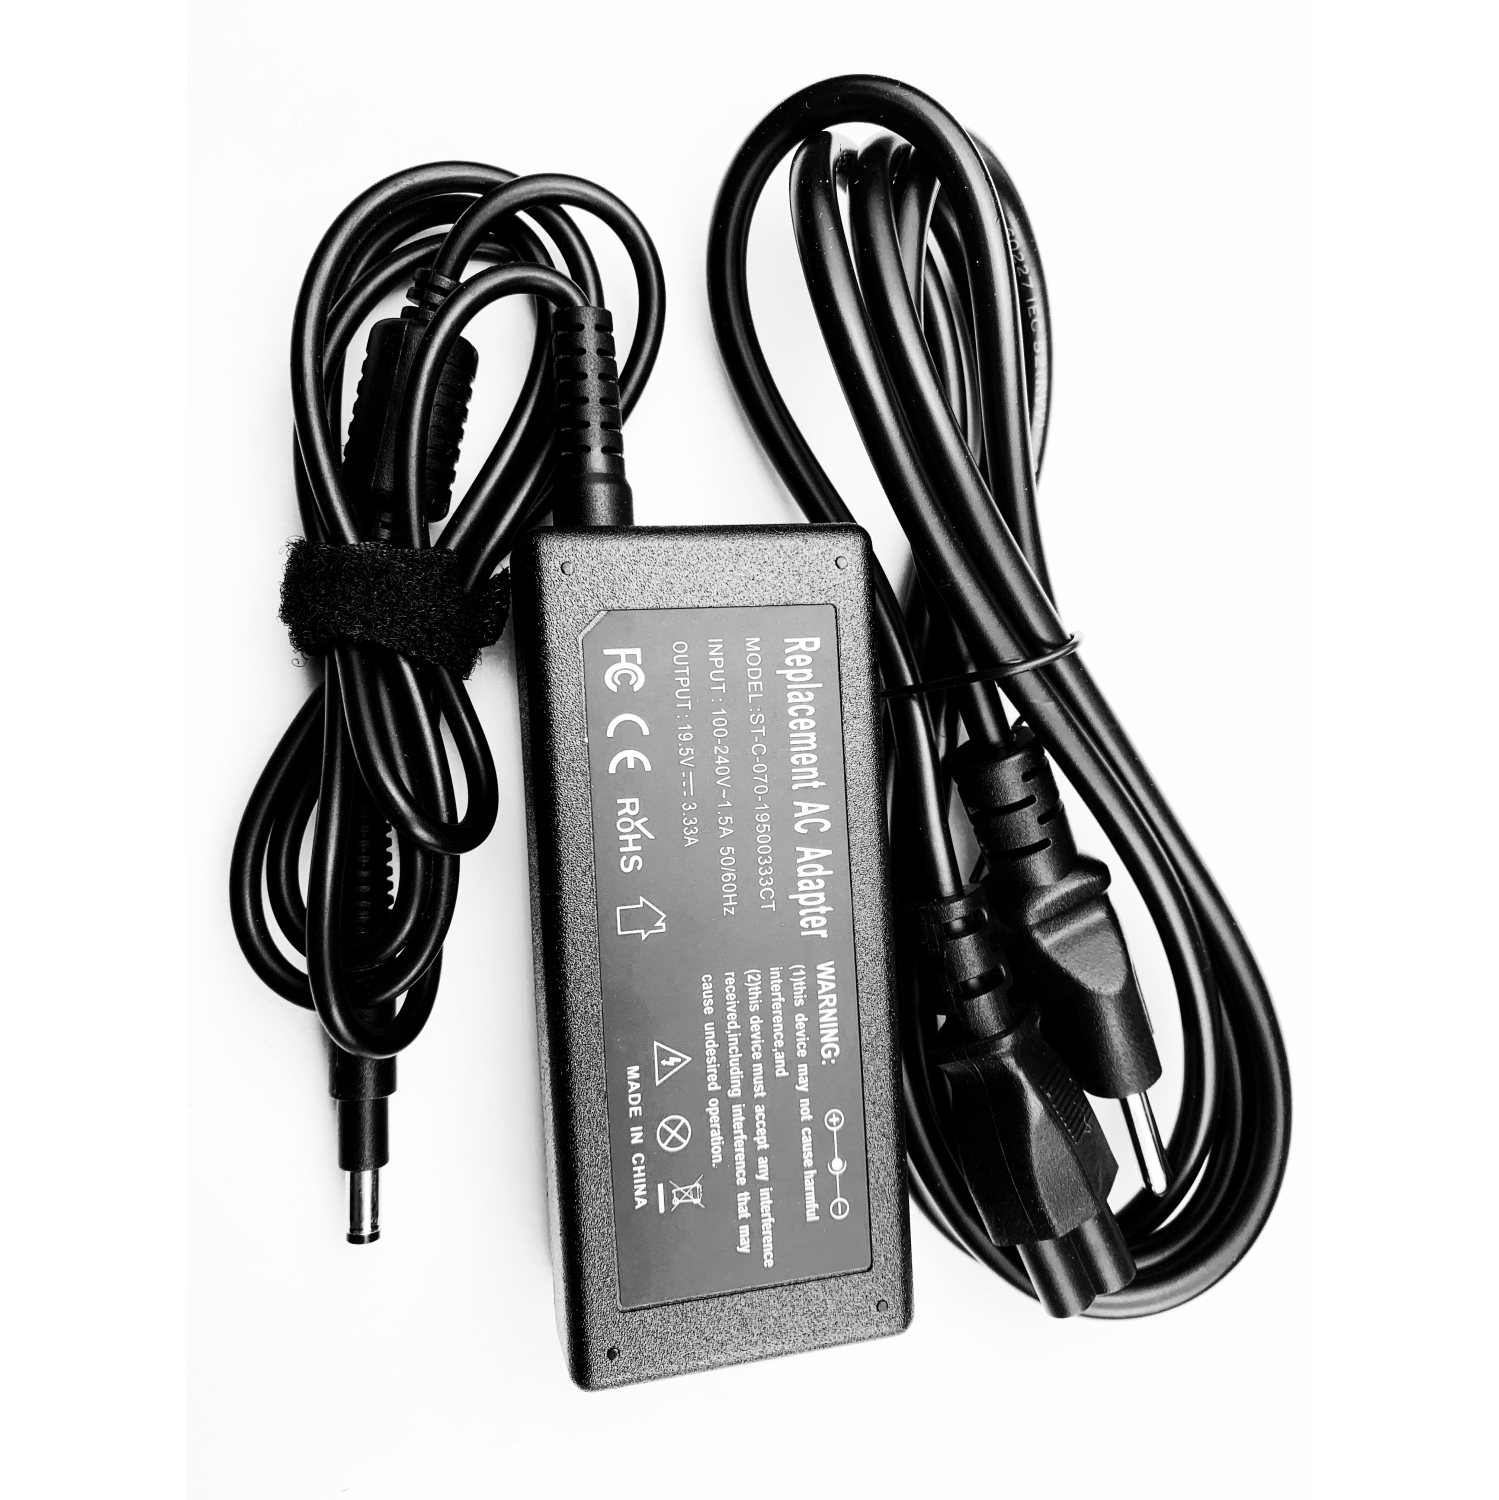 19.5V 65W 4.75mm x 1.7mm new AC adapter power cord charger for HP Pavilion Sleekbook 15-1000 16Z-1000